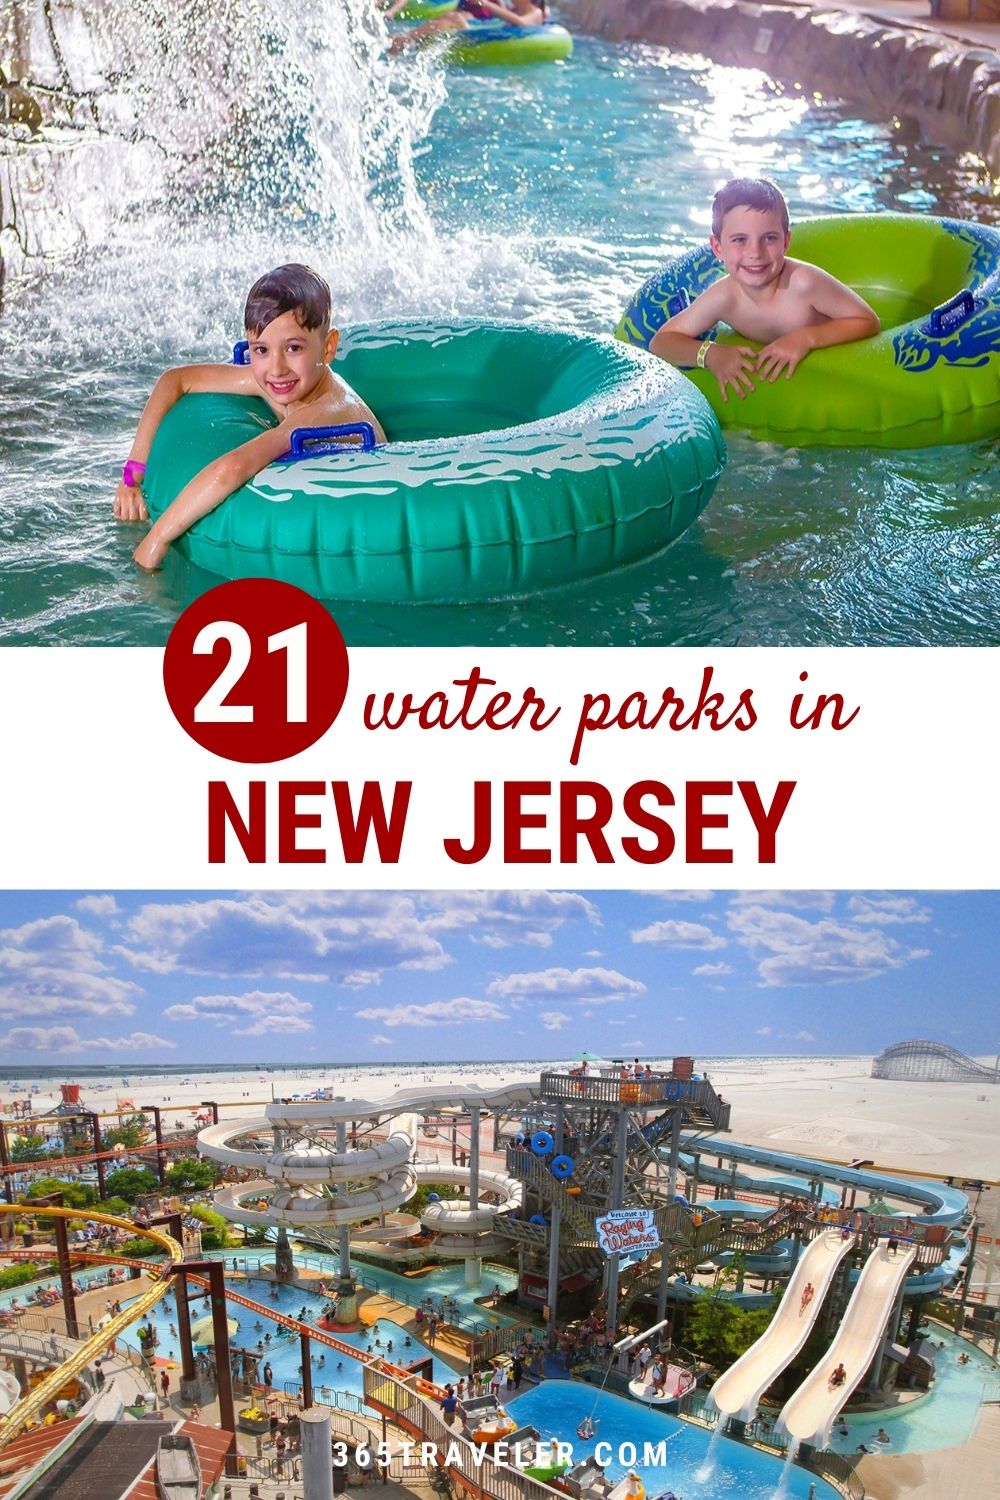 WATER PARKS NEW JERSEY: 21 DESTINATIONS FOR FAMILY FUN